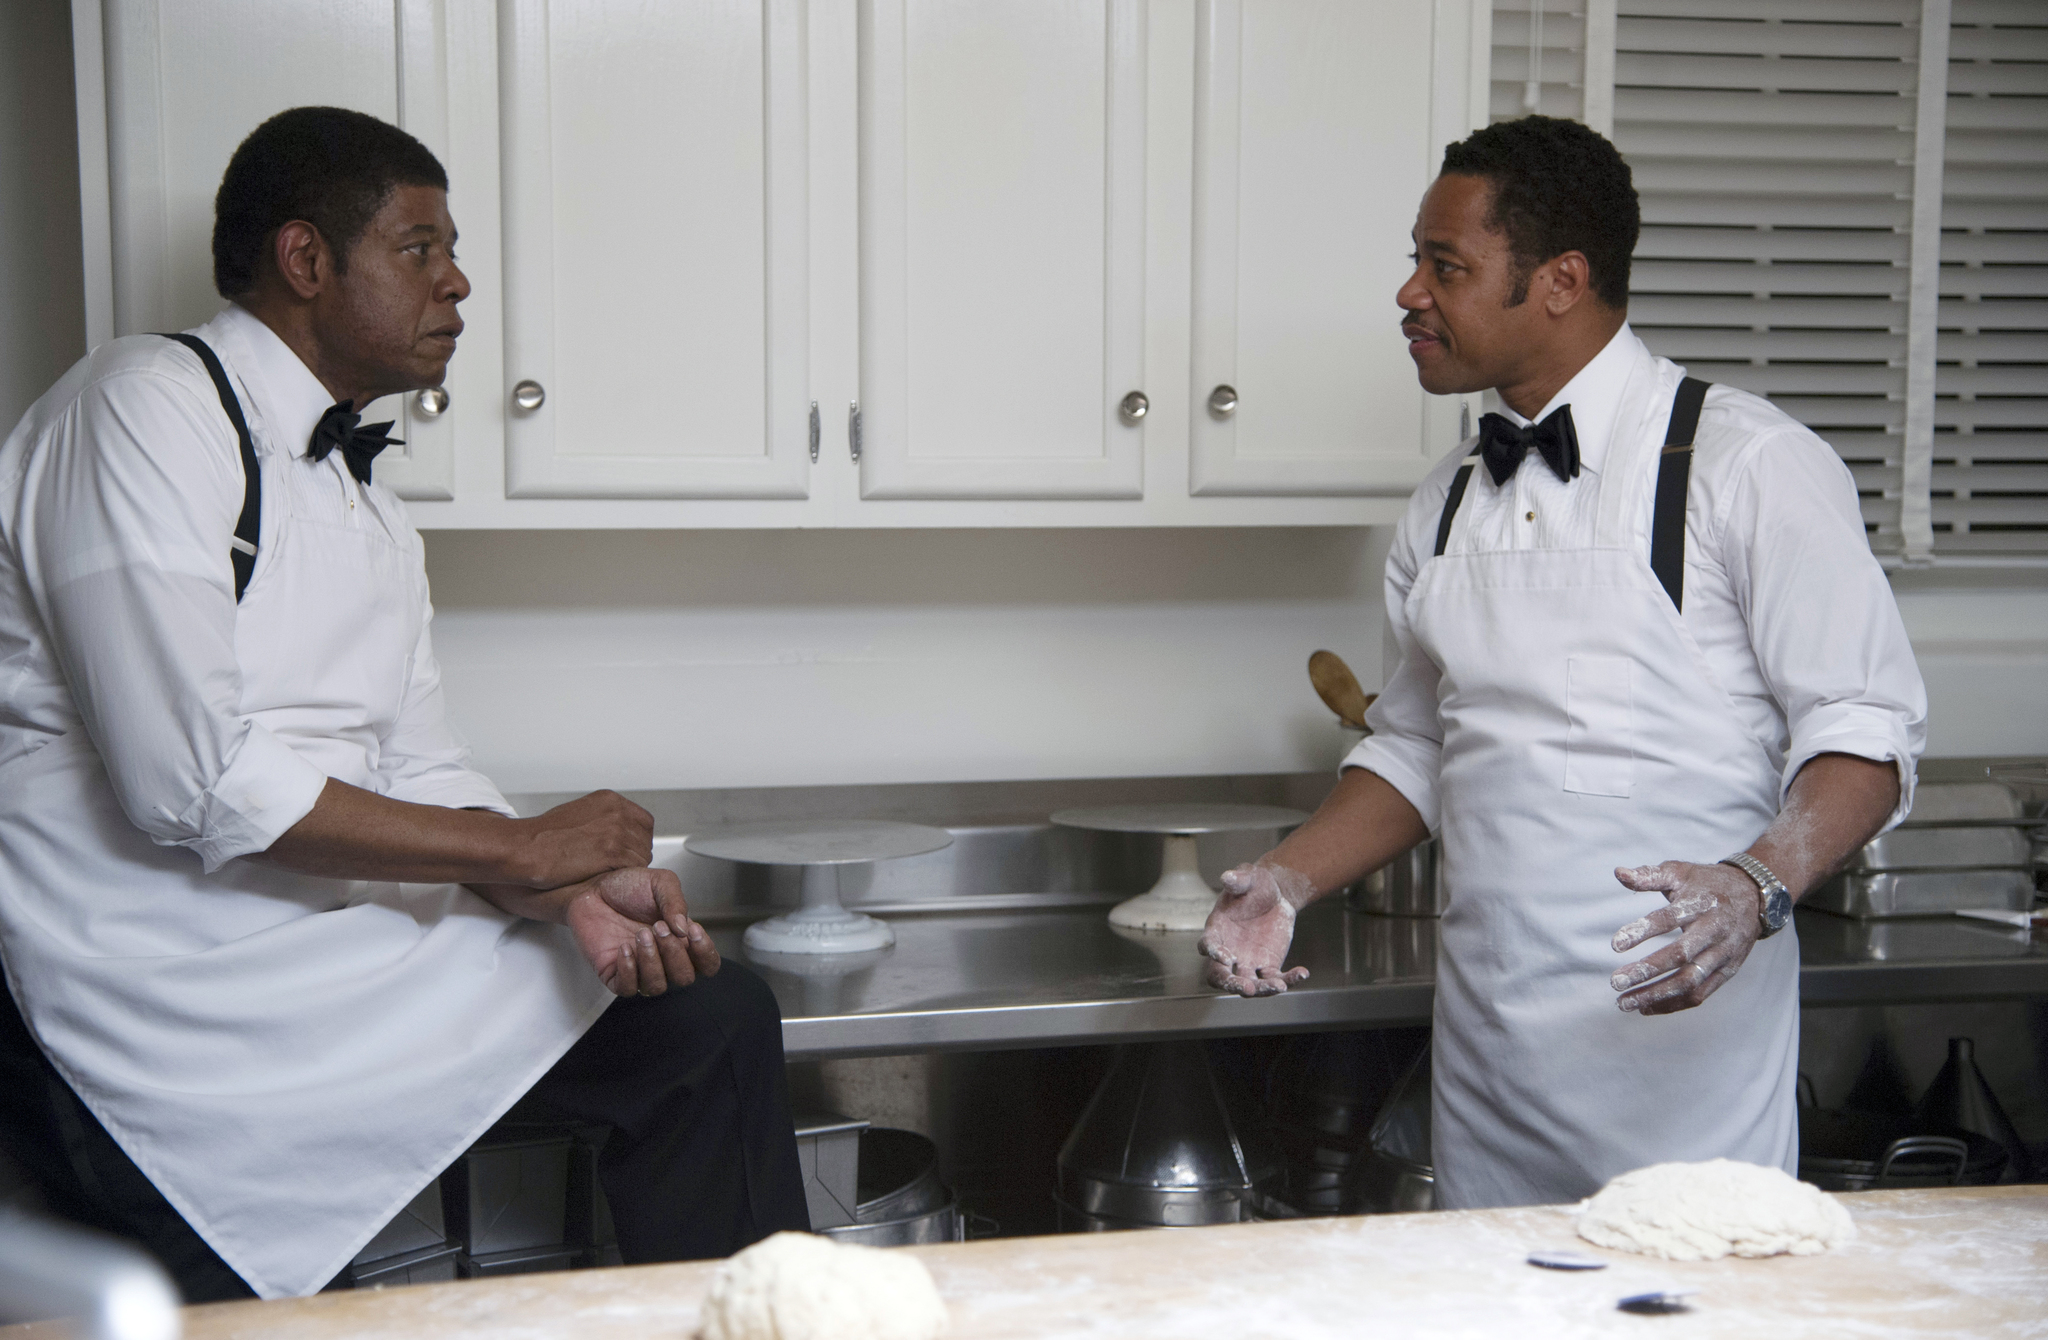 Still of Cuba Gooding Jr. and Forest Whitaker in The Butler (2013)